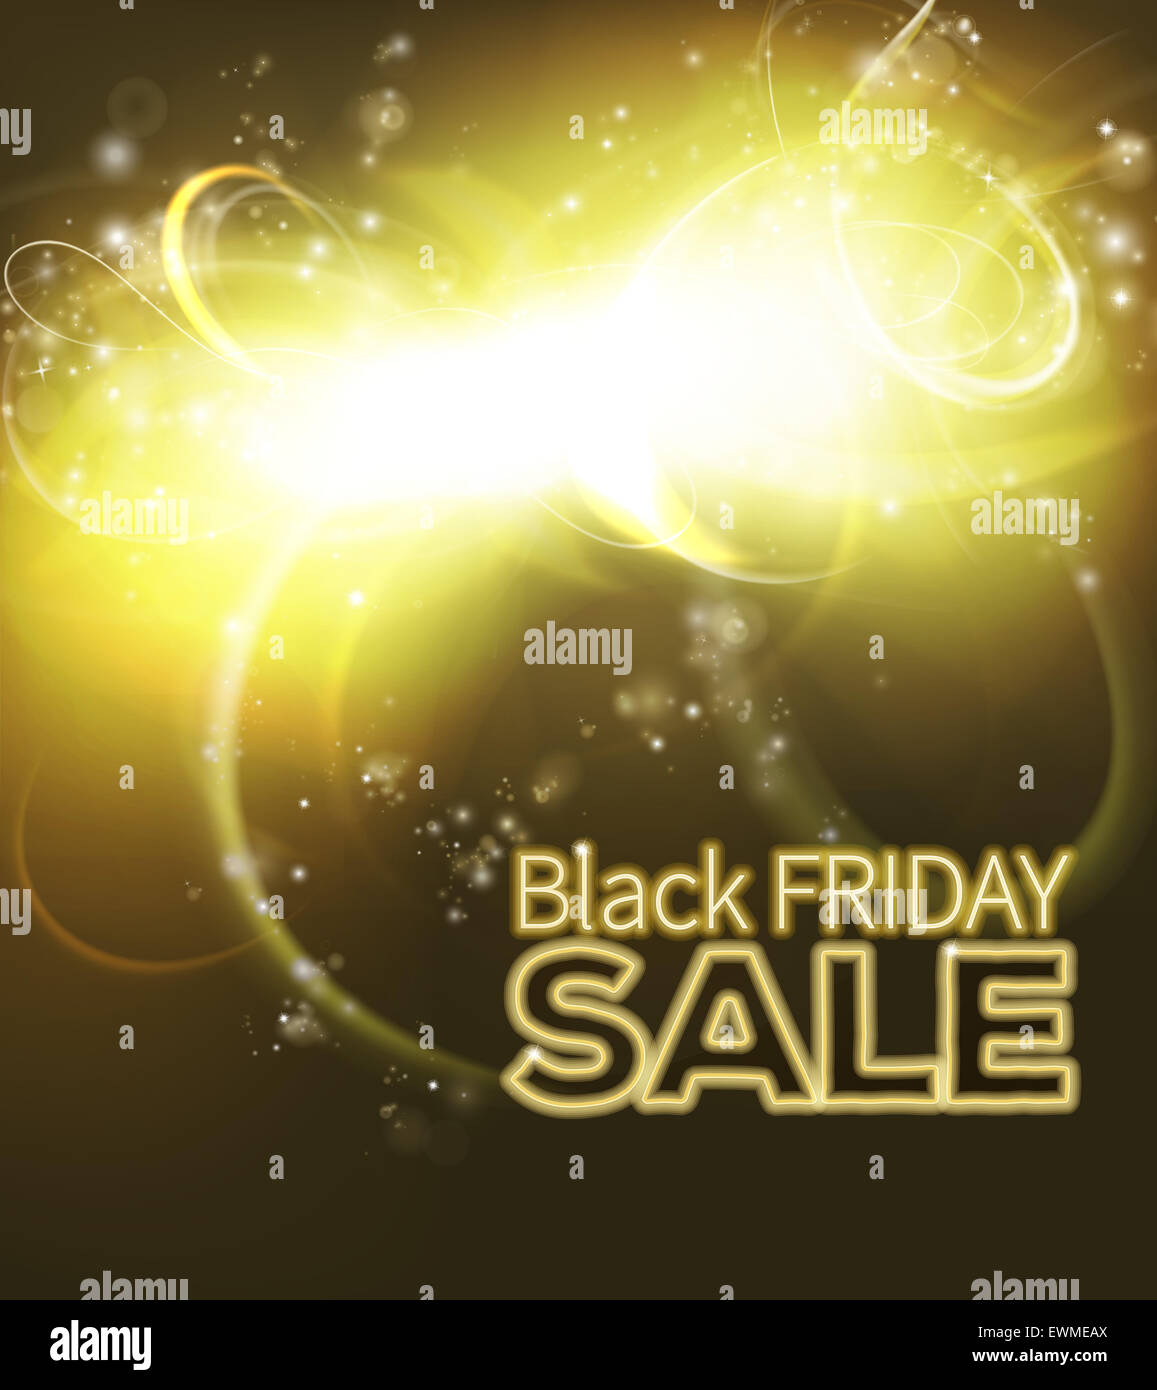 Black Friday abstract Sale background Black Friday SALE neon text Stock Photo